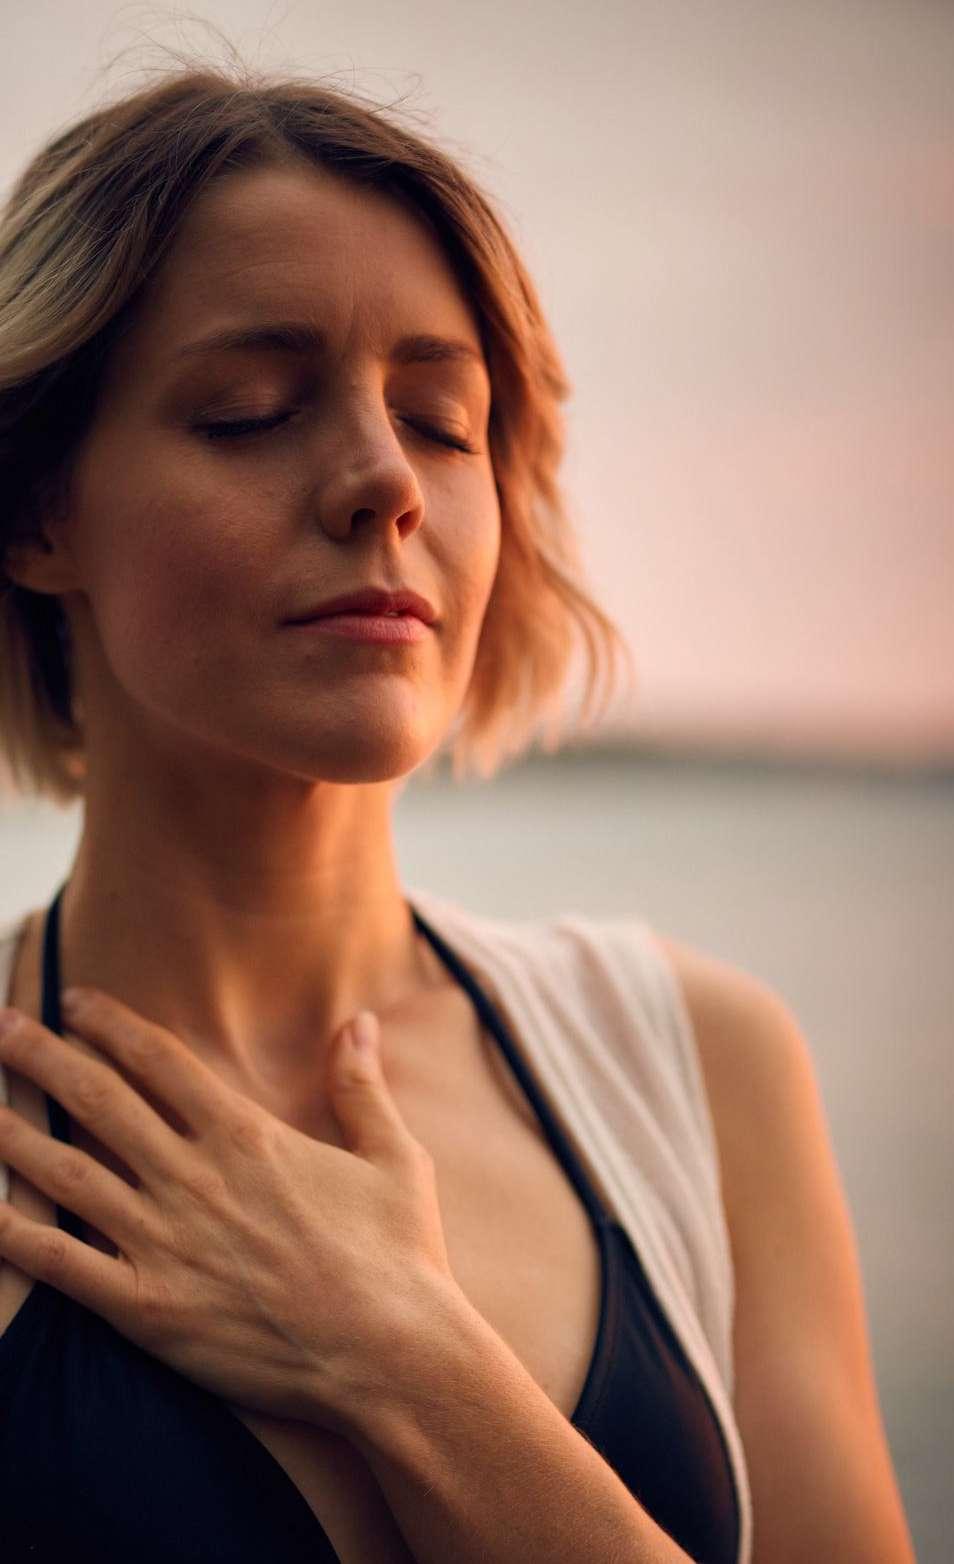 Try inhaling completely and then slowly exhaling completely. If you take one minute to just do this focused breathing each day, you will find that you feel better during that minute.